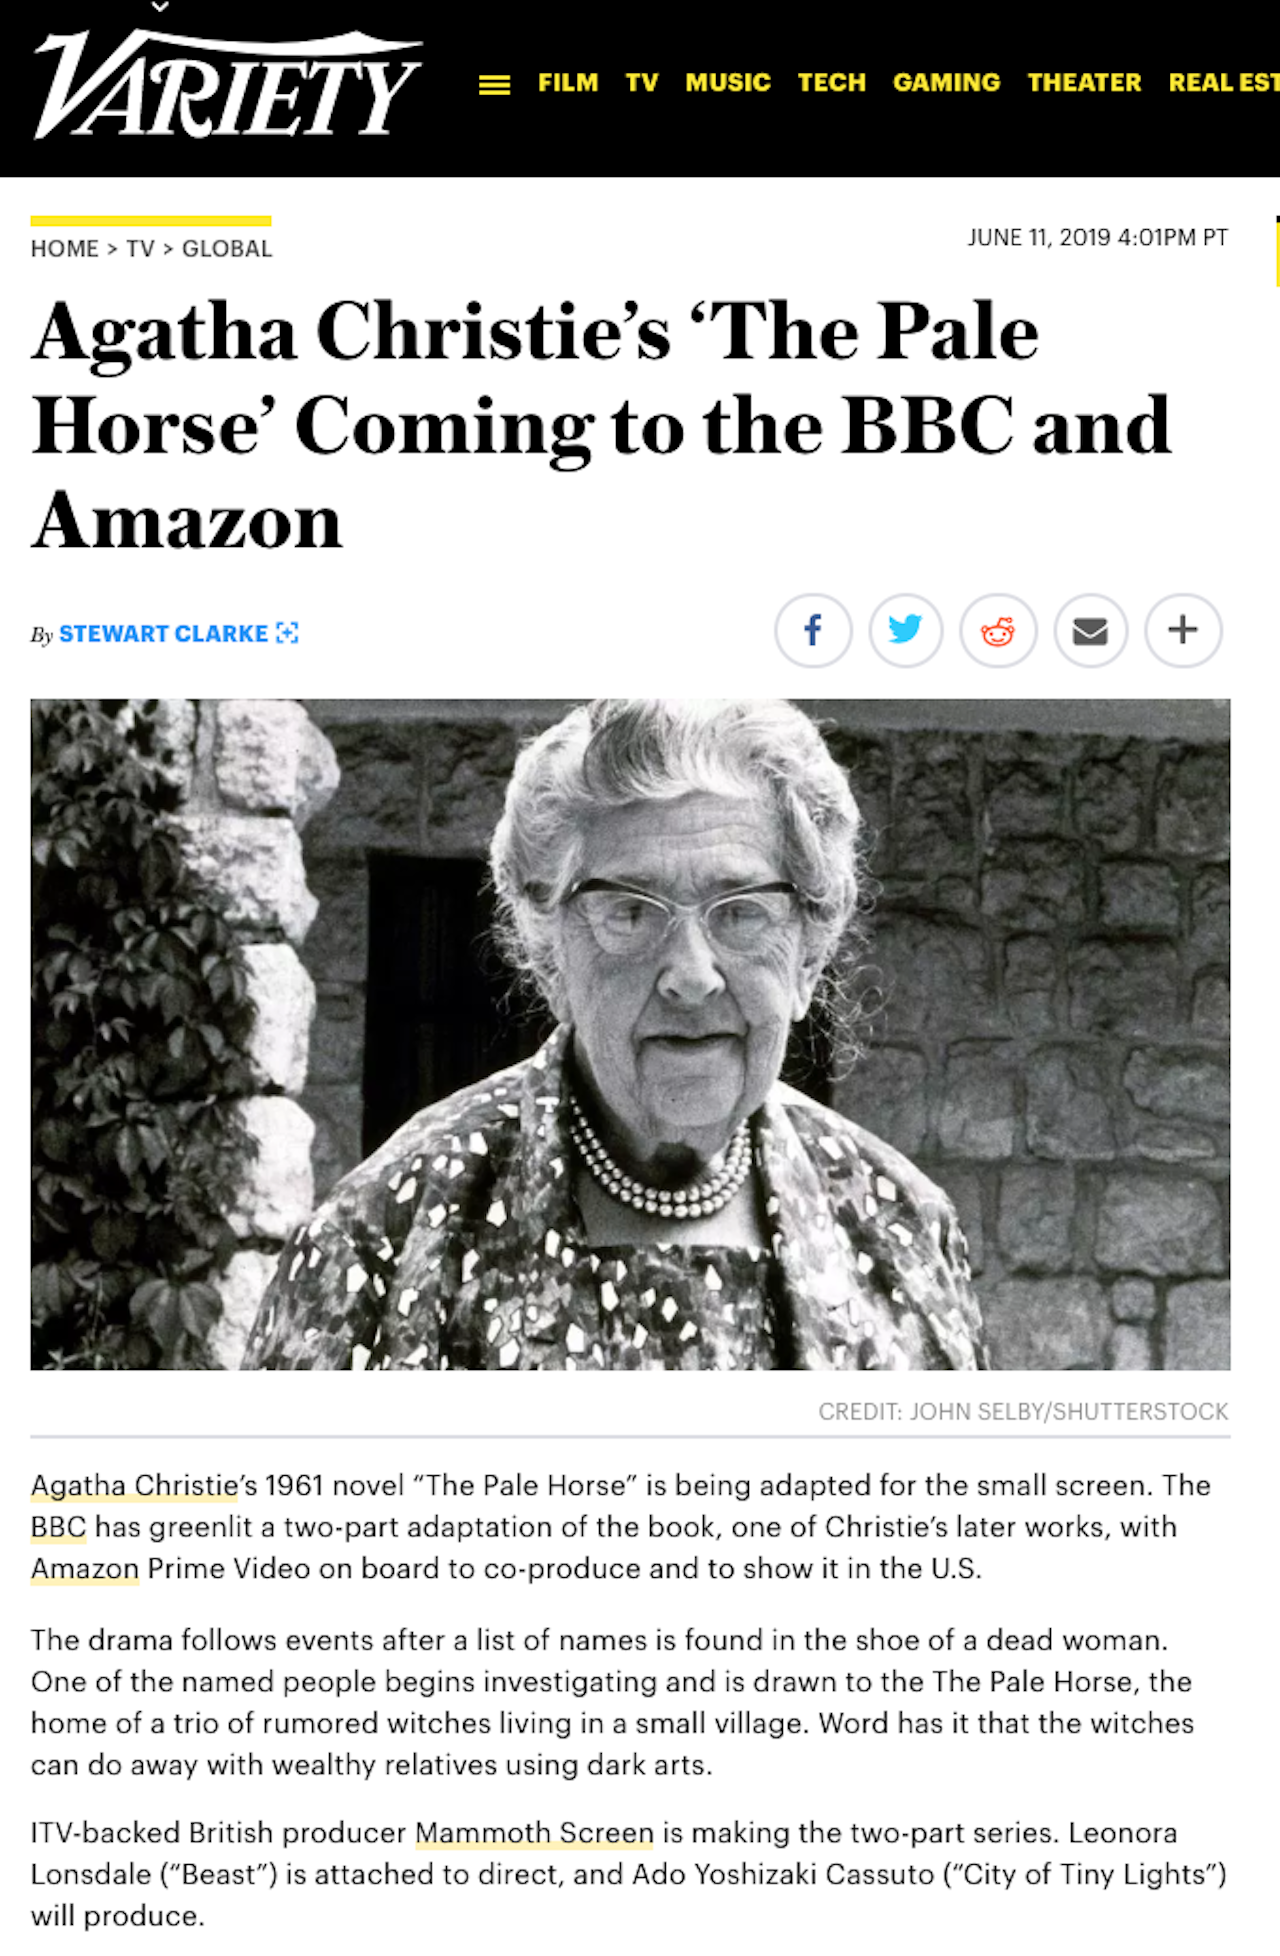 Leonora confirmed to direct the adaptation of Agatha Christie's 'The Pale Horse'